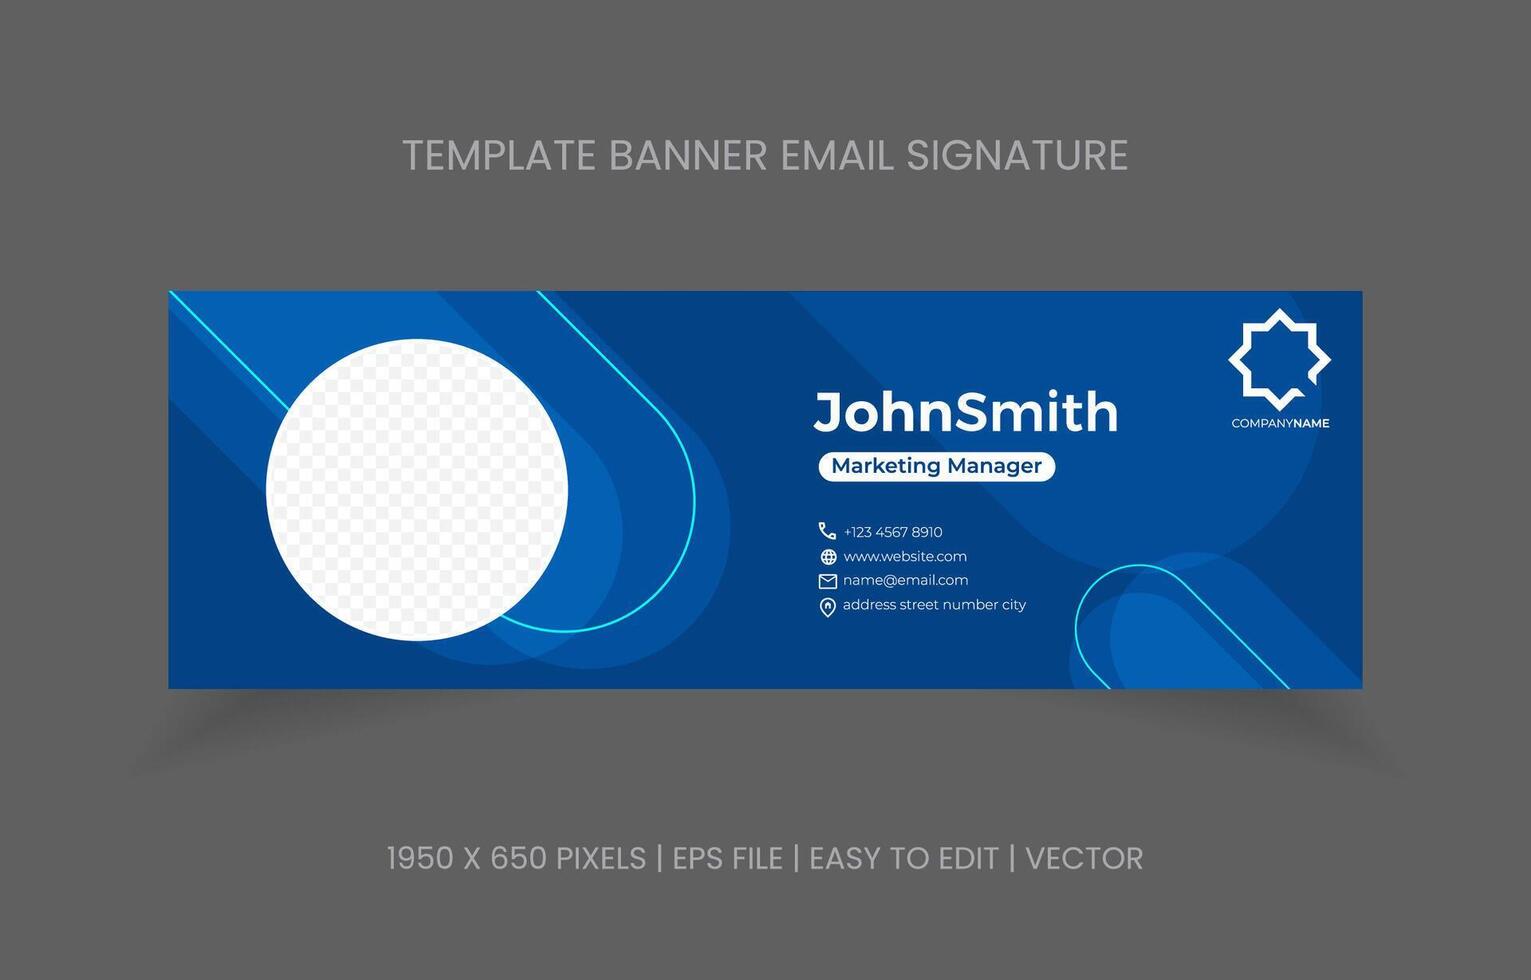 email signature template design for business company and corporate identity. promotion banner footer email. vector